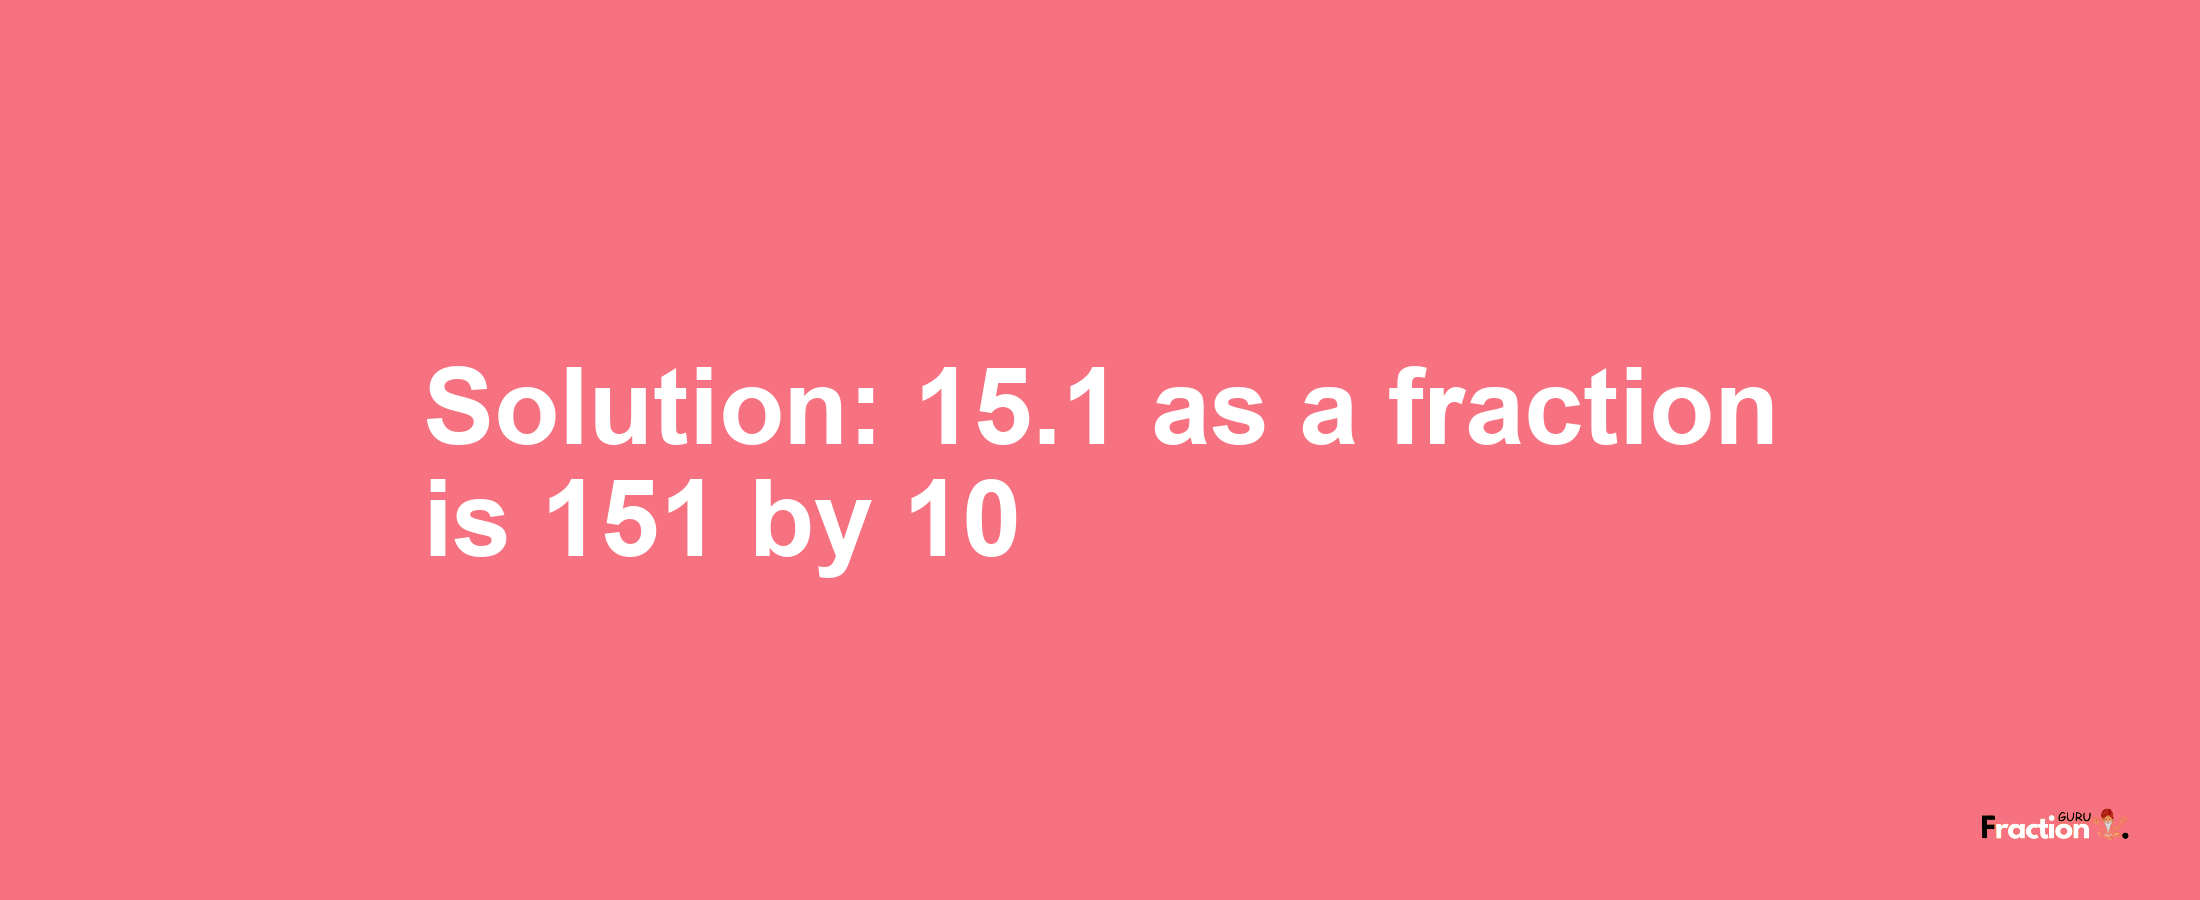 Solution:15.1 as a fraction is 151/10